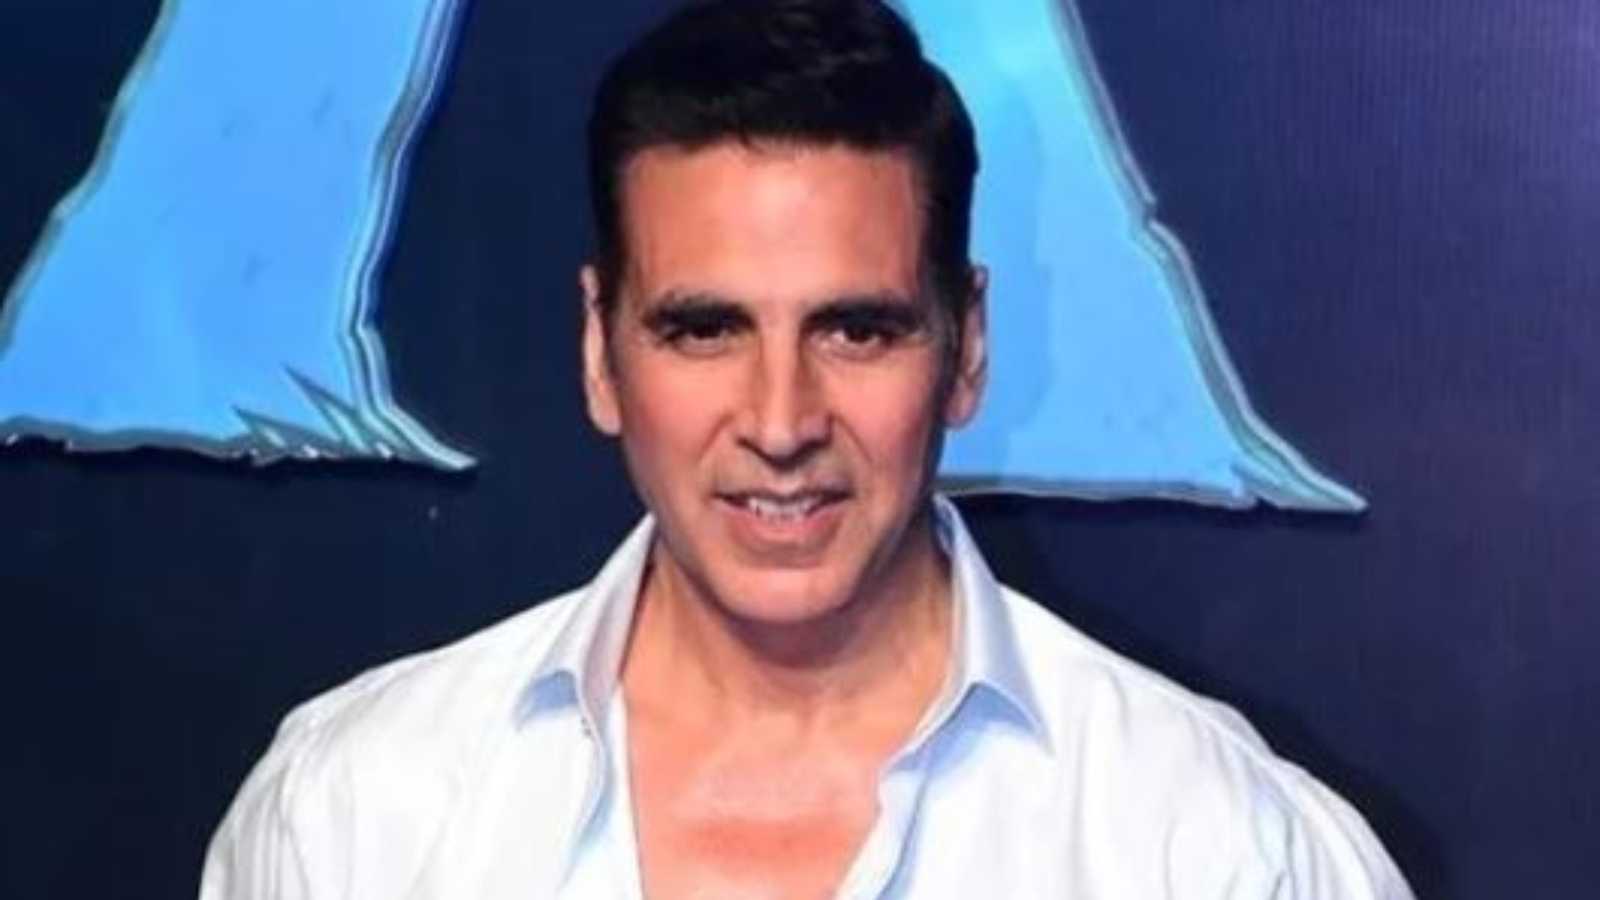 Akshay Kumar opens up about giving back to back flops before OMG 2, says he won't give up